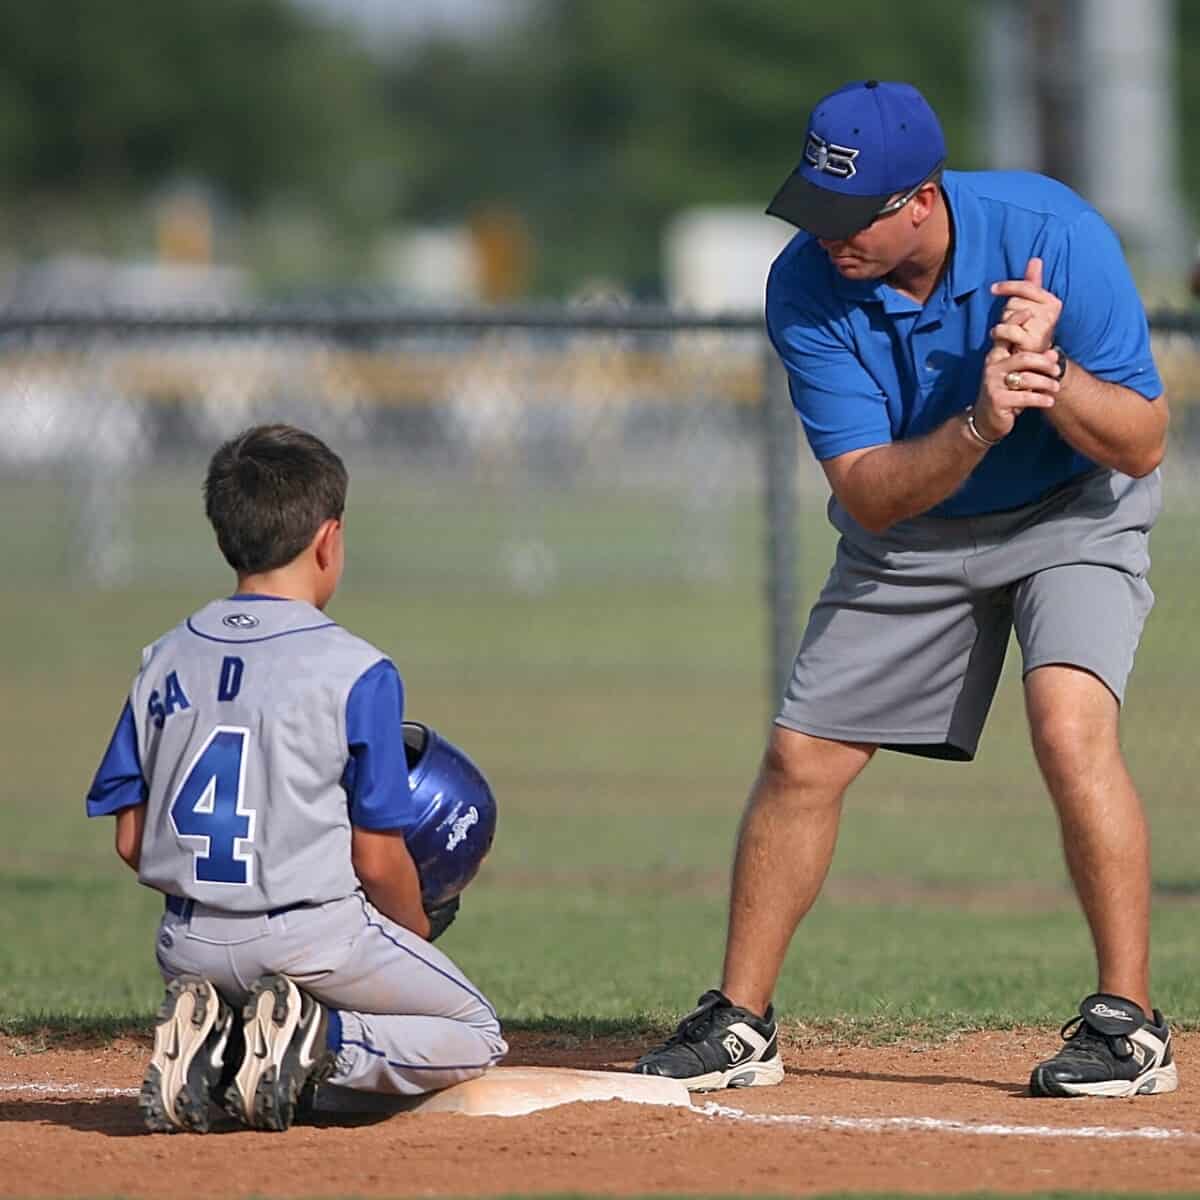 How To Coach Your First Day of Baseball Practice